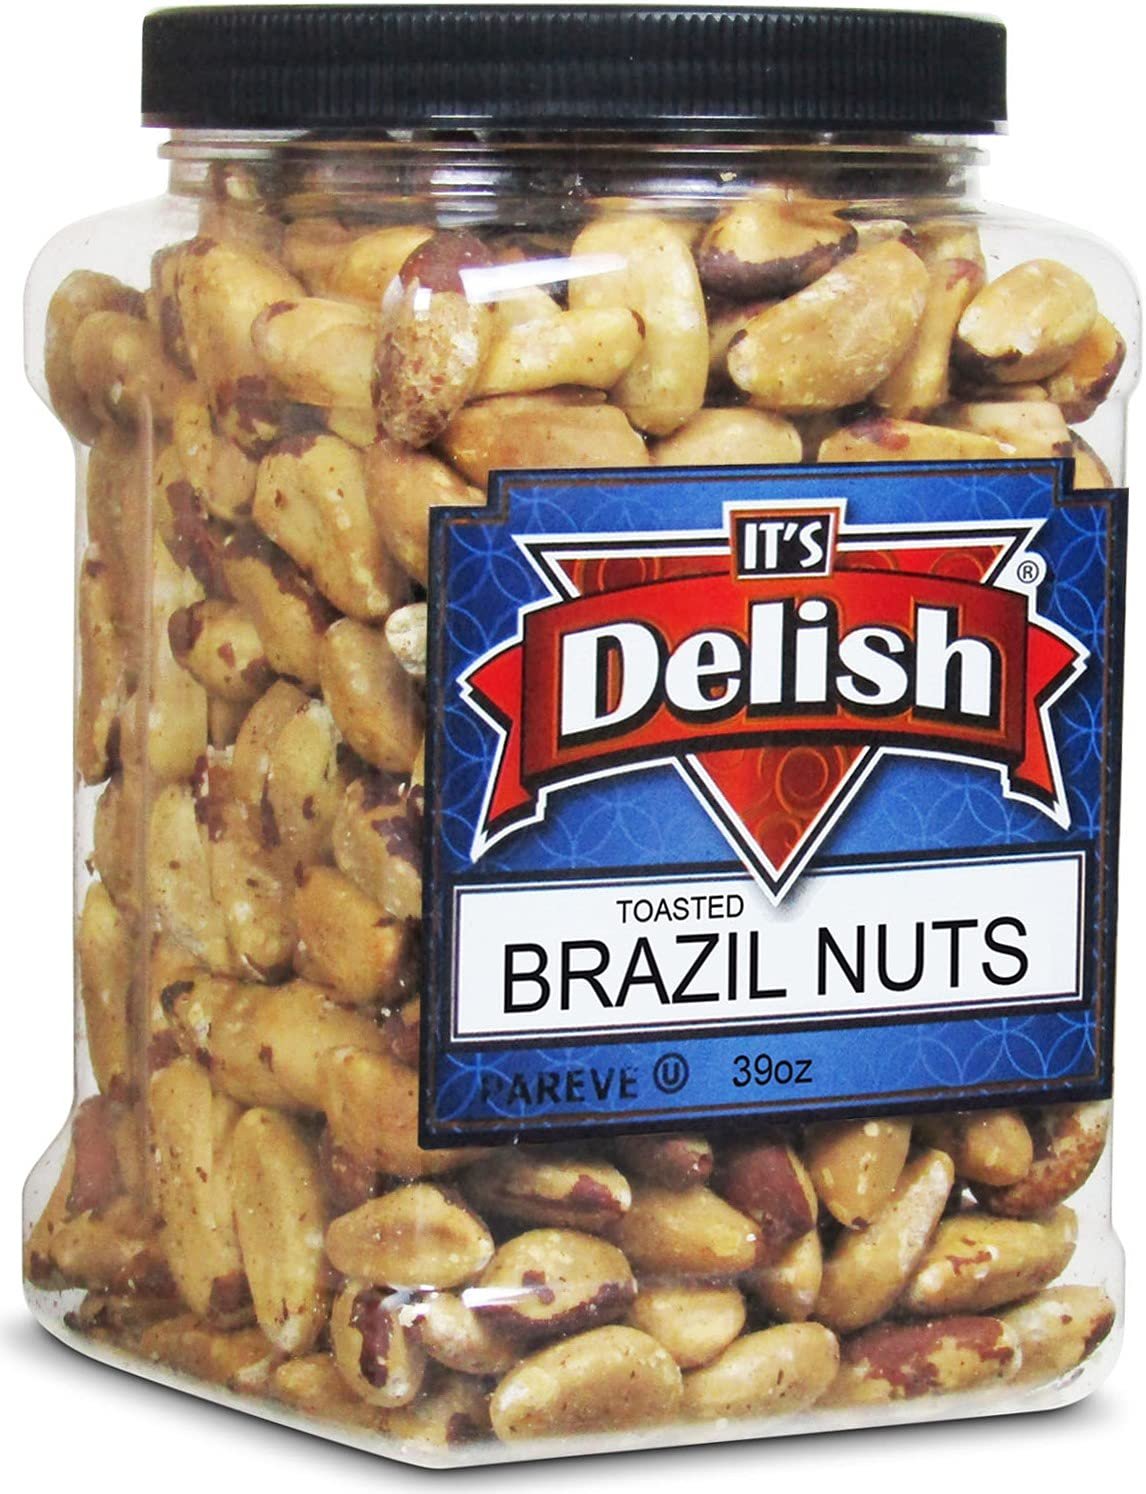 Toasted Brazil Nuts 39 Oz Jumbo Reusable Container (Jar) –